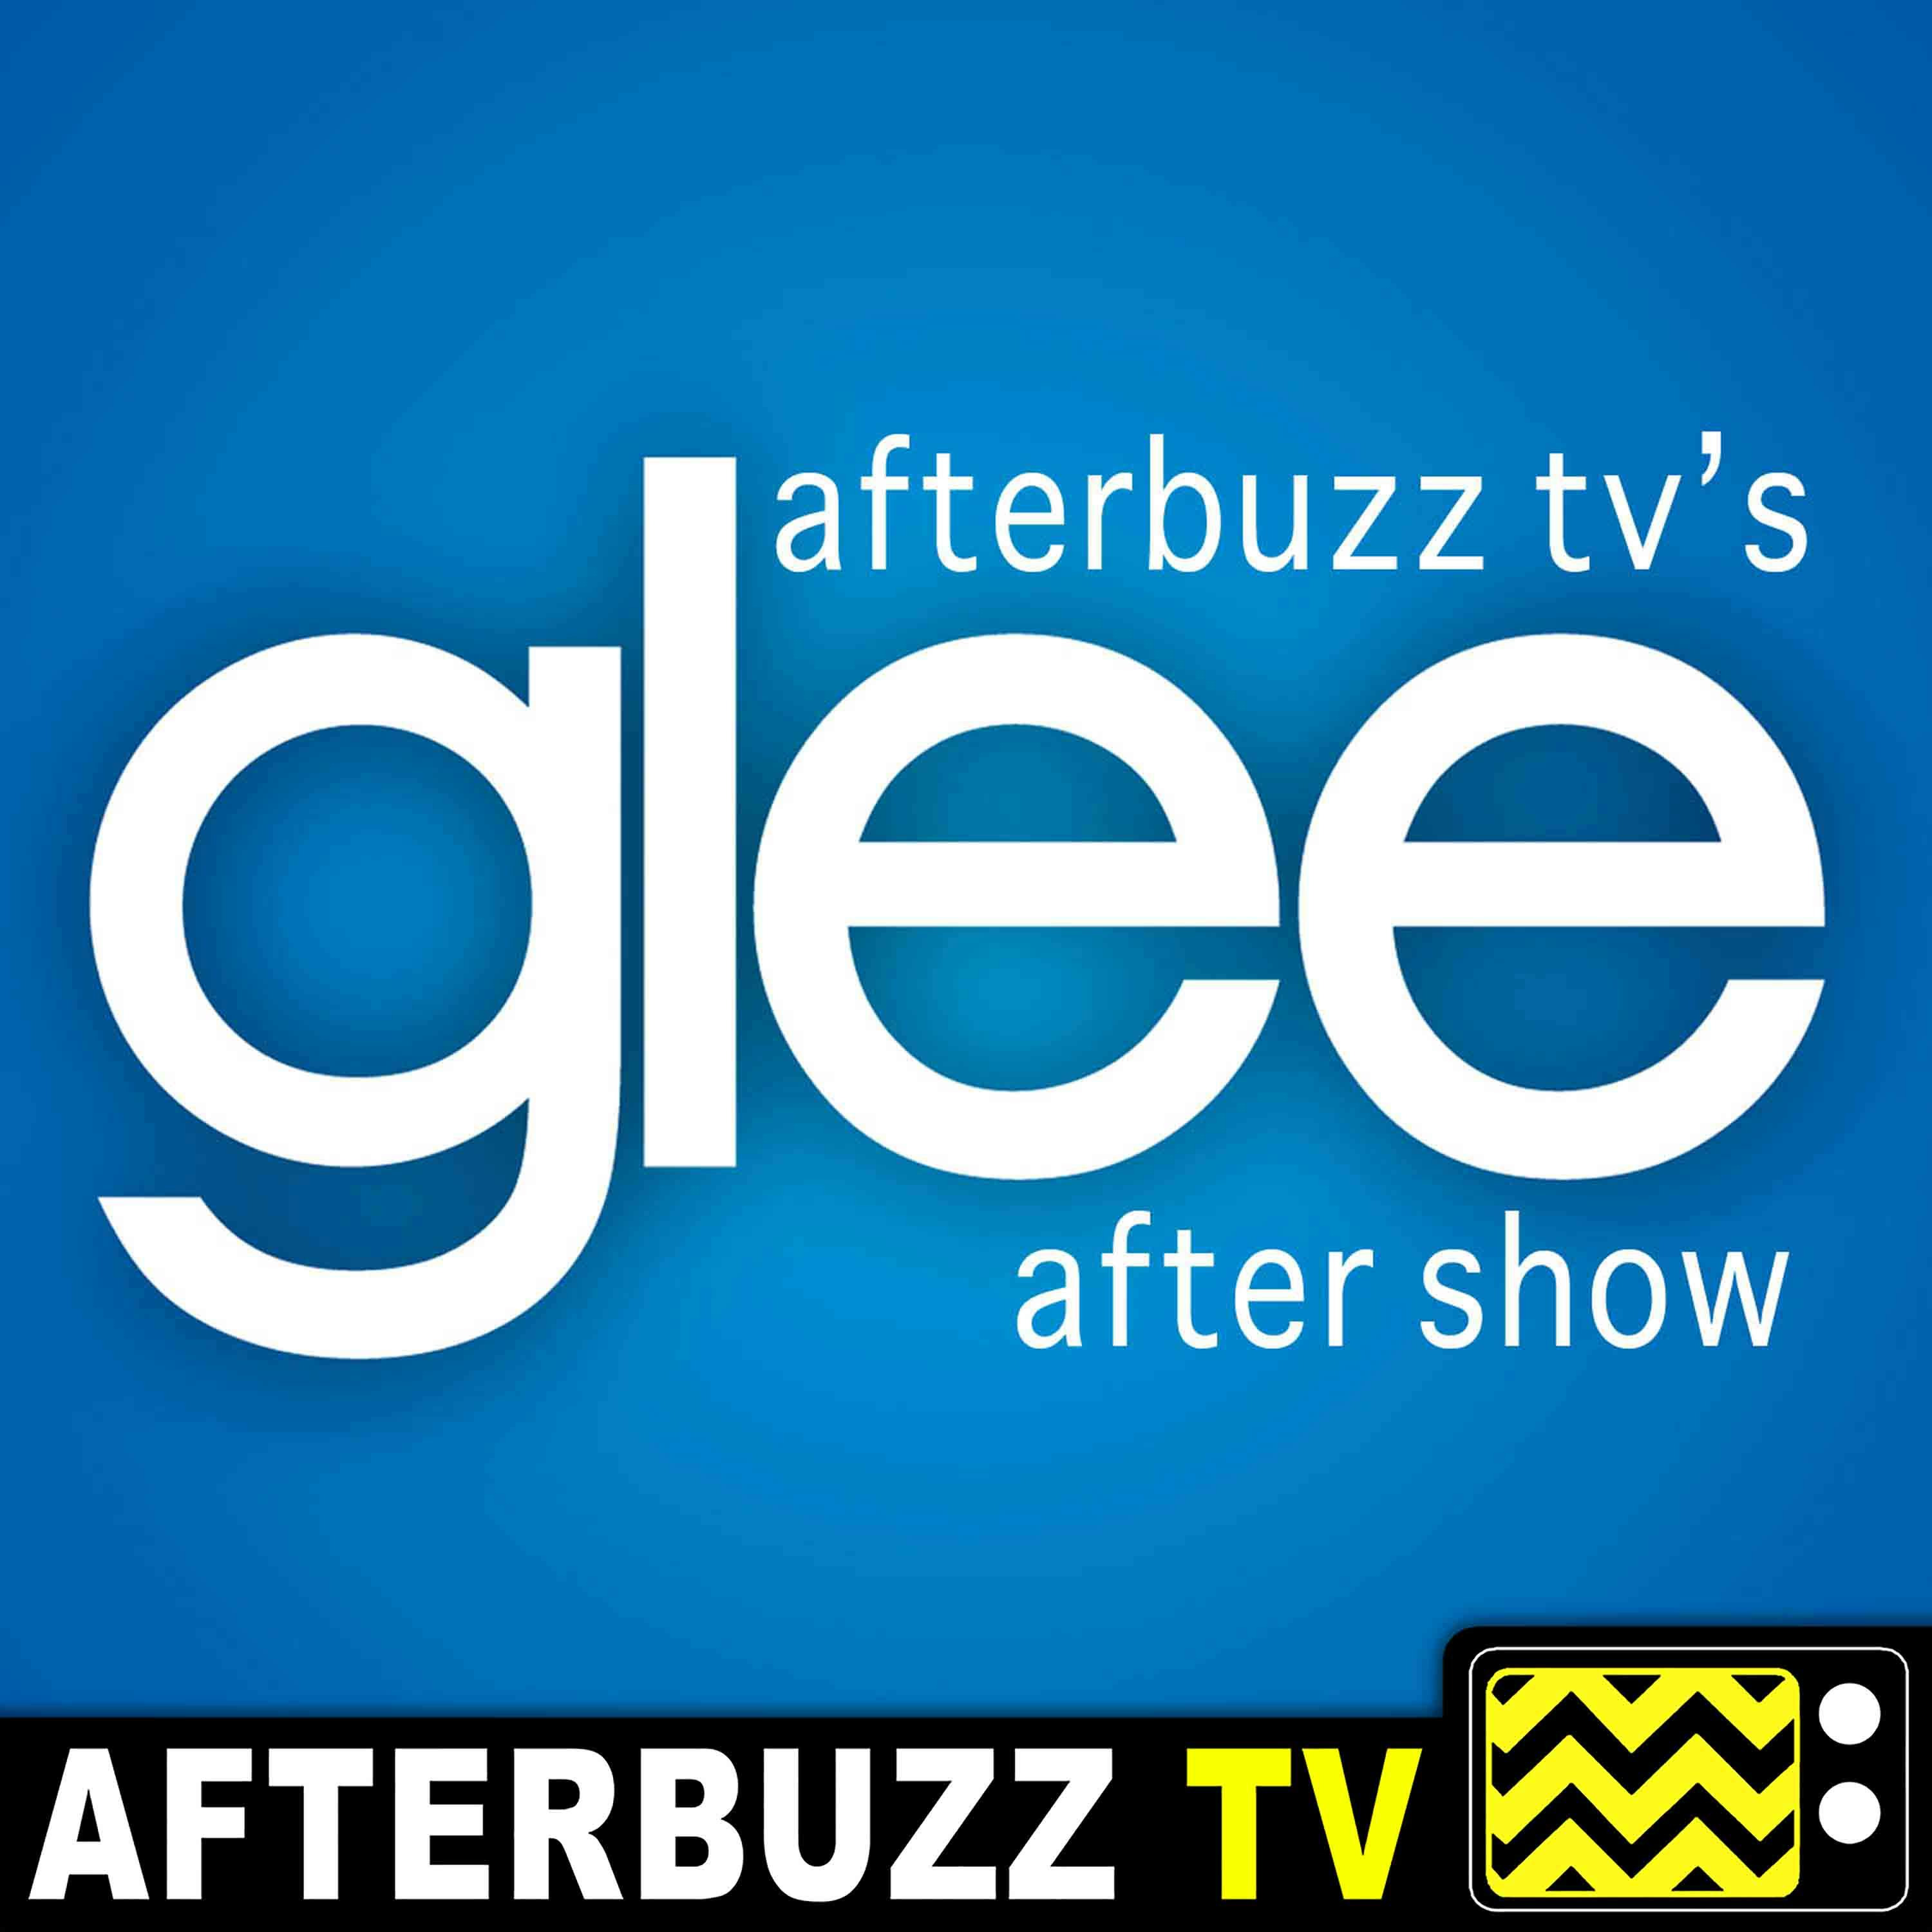 Glee S:5 | The Back-Up Plan E:18 | AfterBuzz TV AfterShow